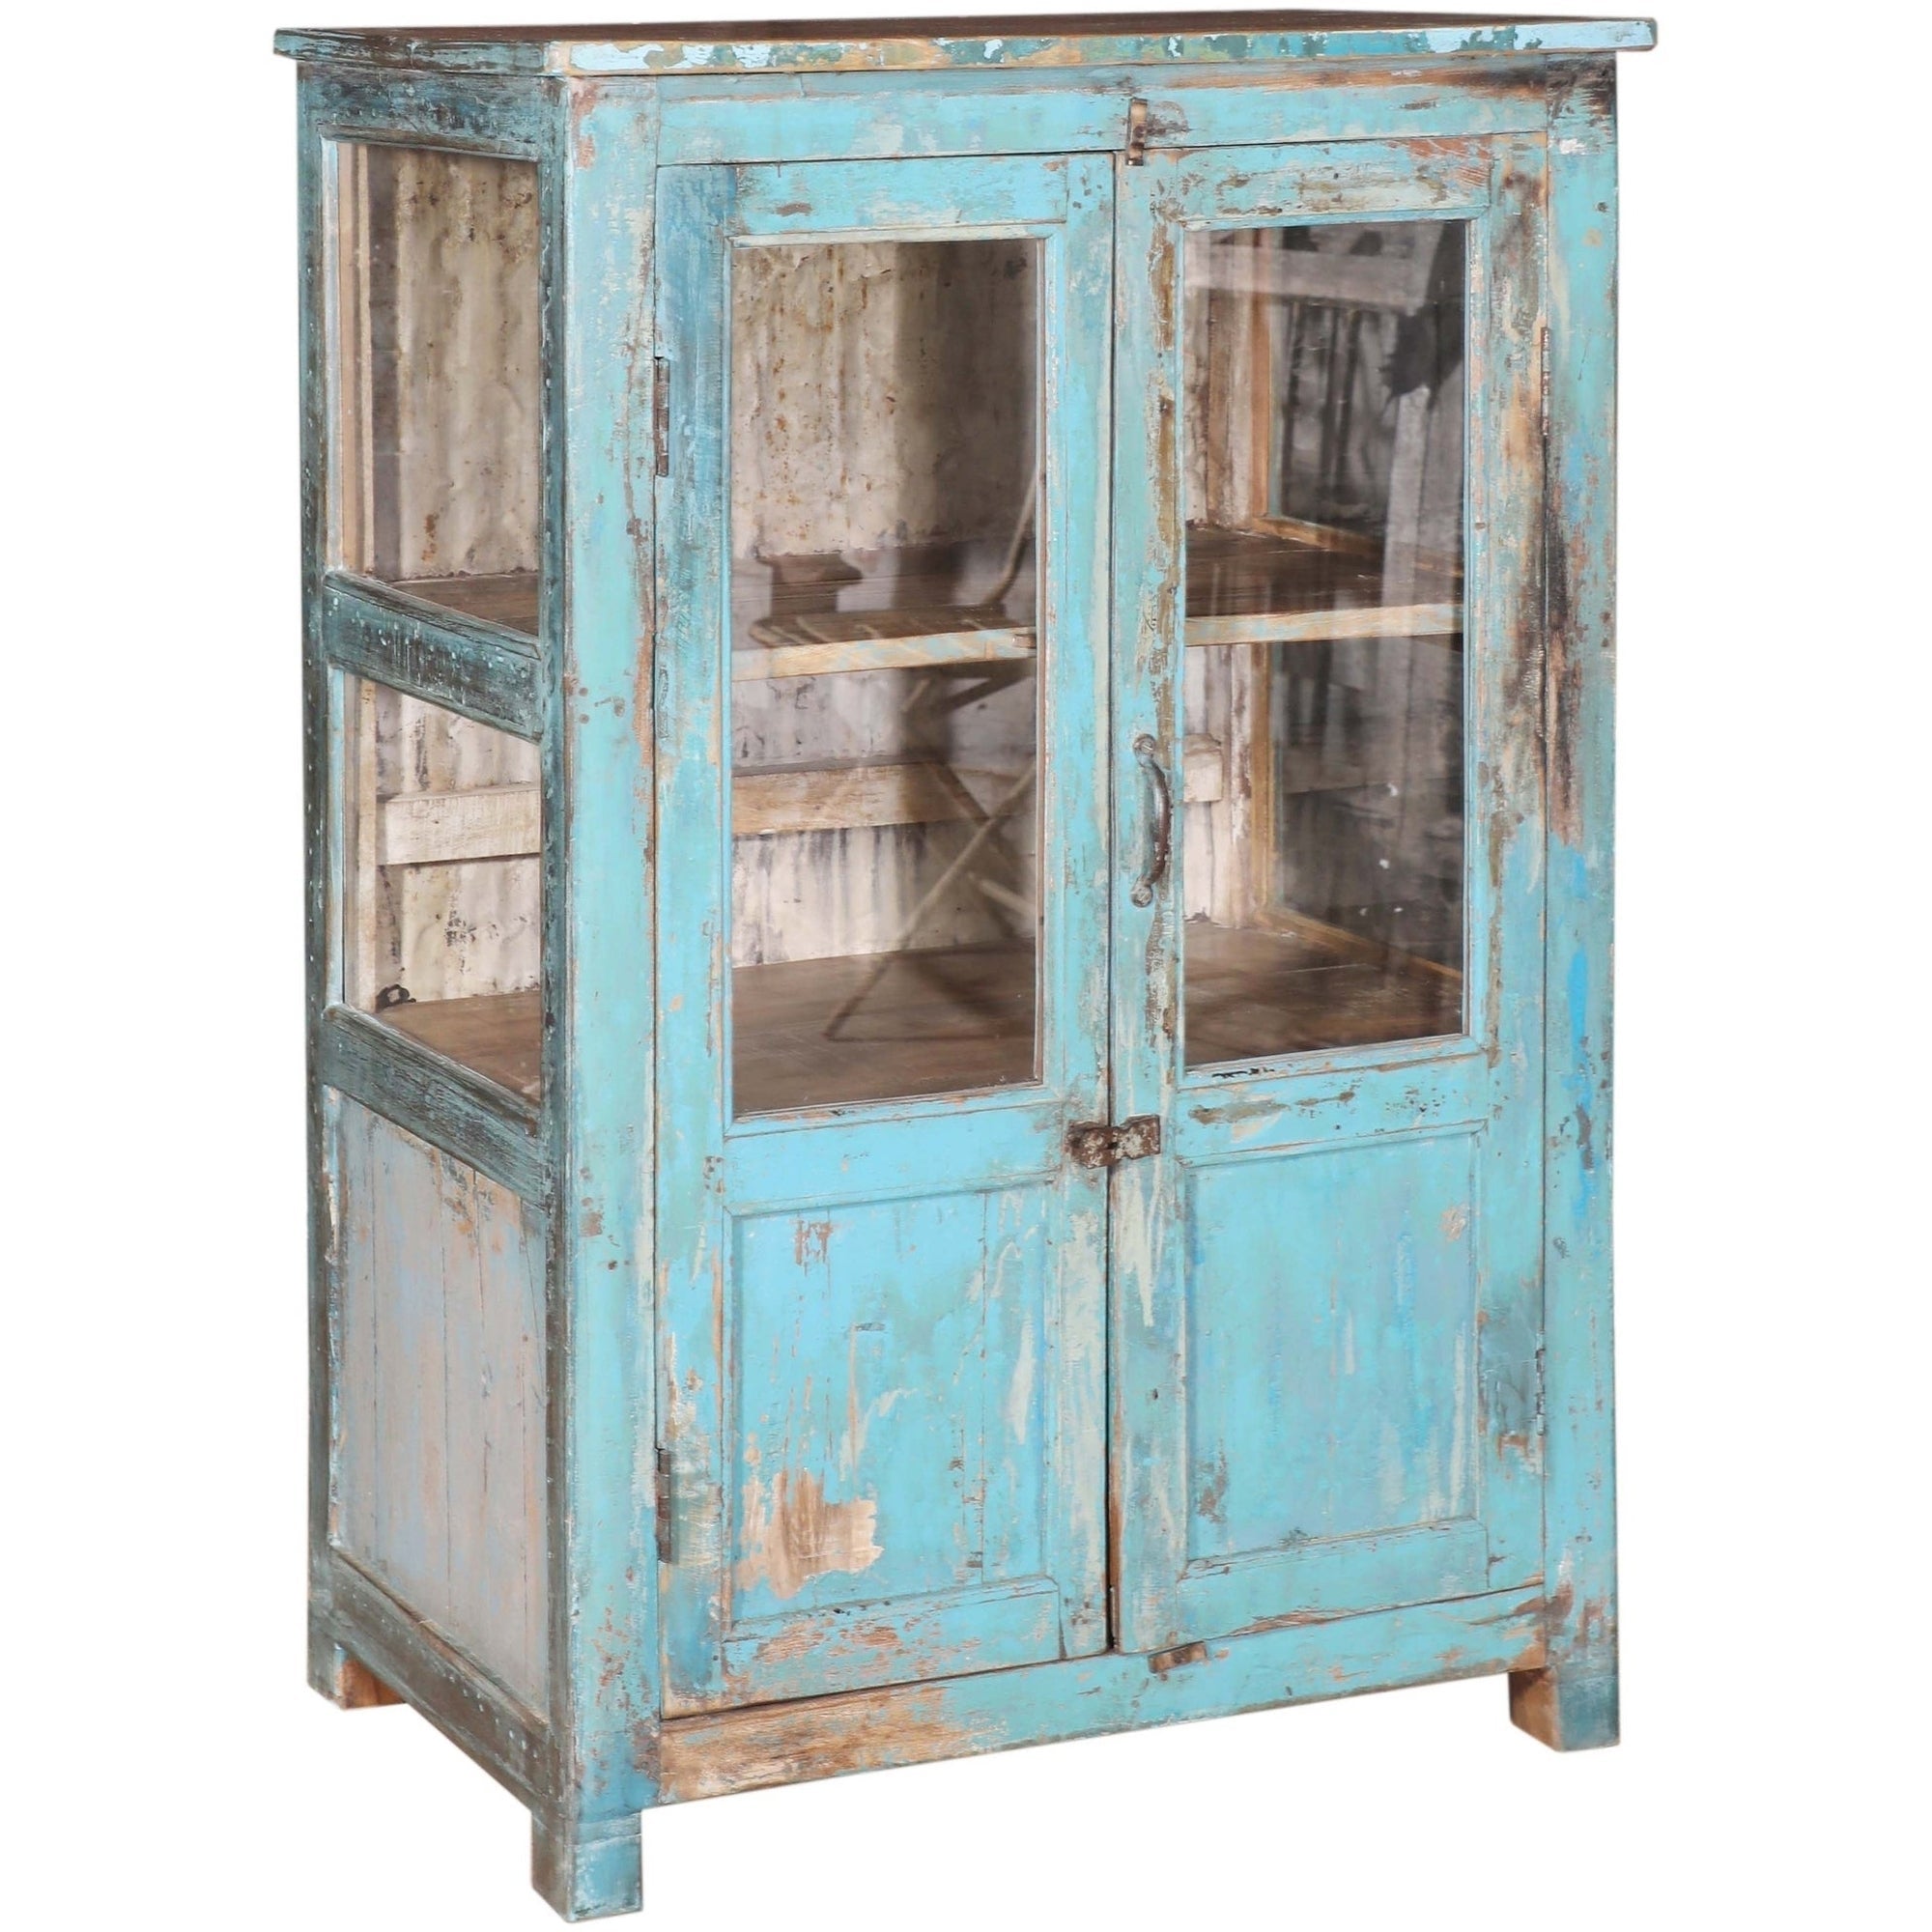 RM-060770, Wooden Cabinet With Glass, Teak, 50+Yrs Old - iDekor8